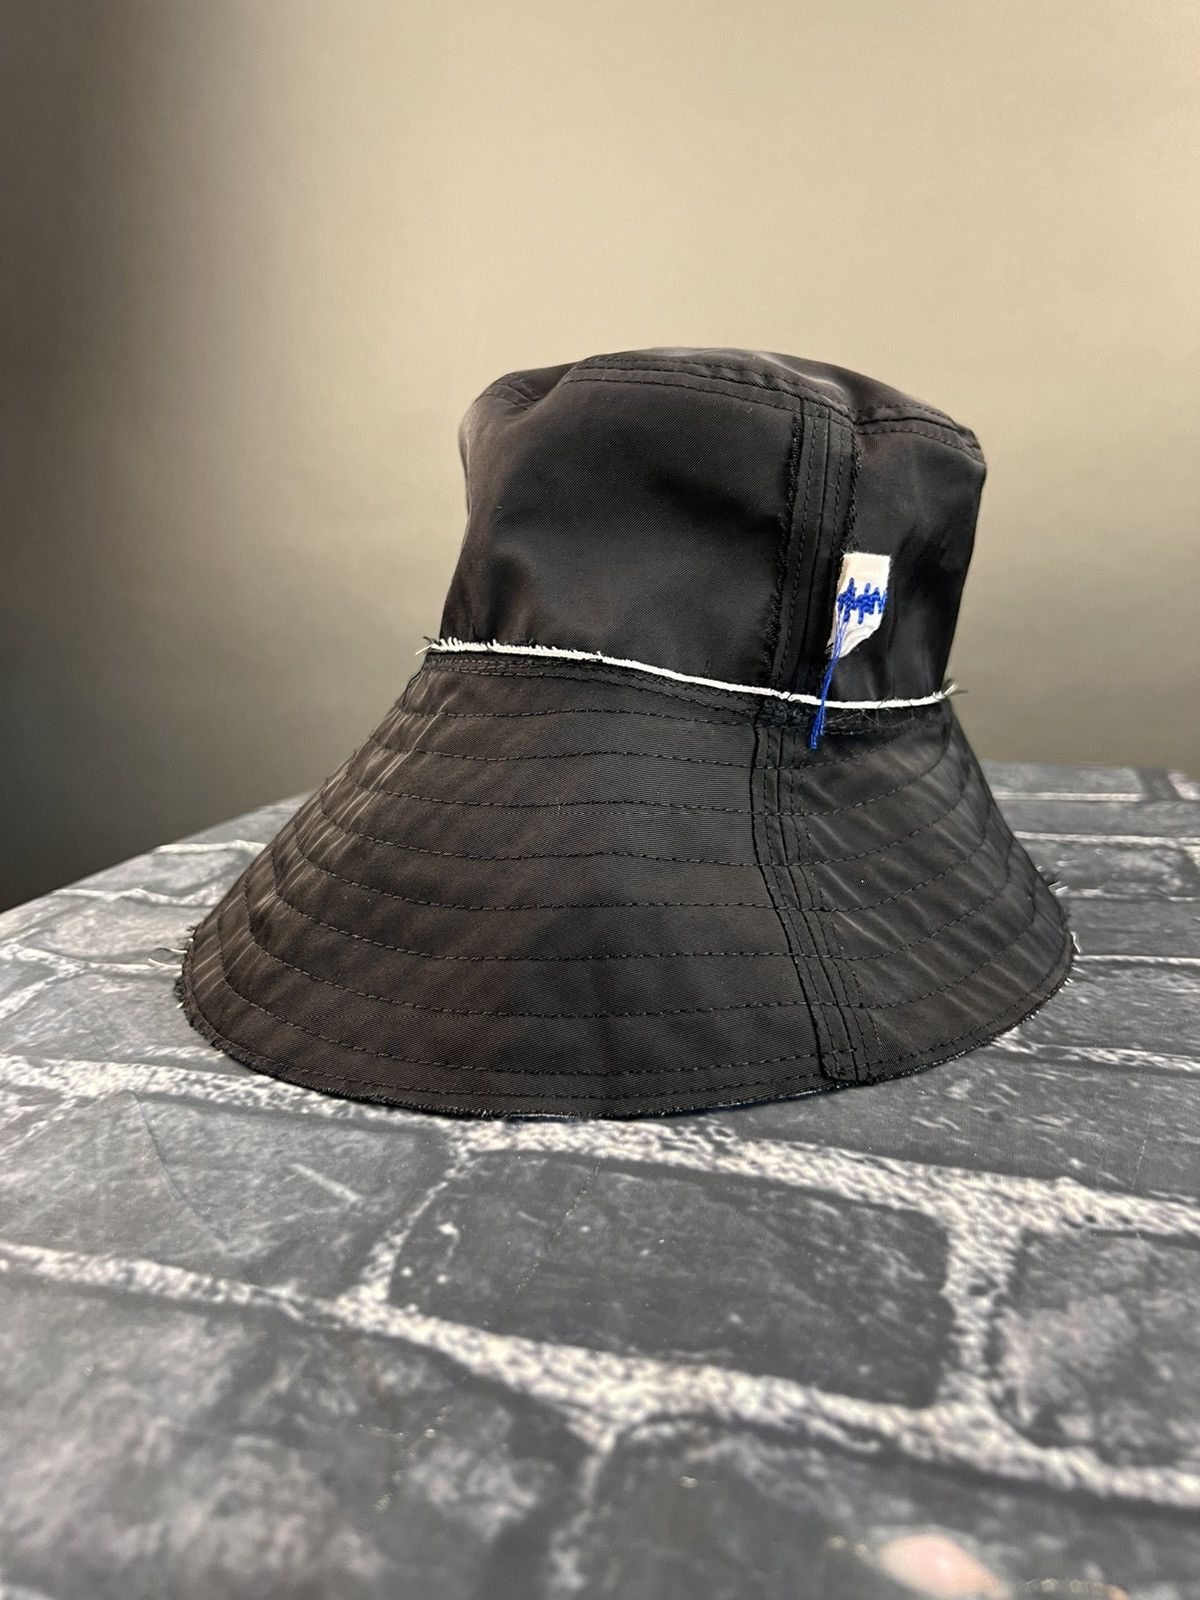 Grail ADER SS21 Bucket Hat Flared Distressed Brim Made in Korea | Grailed